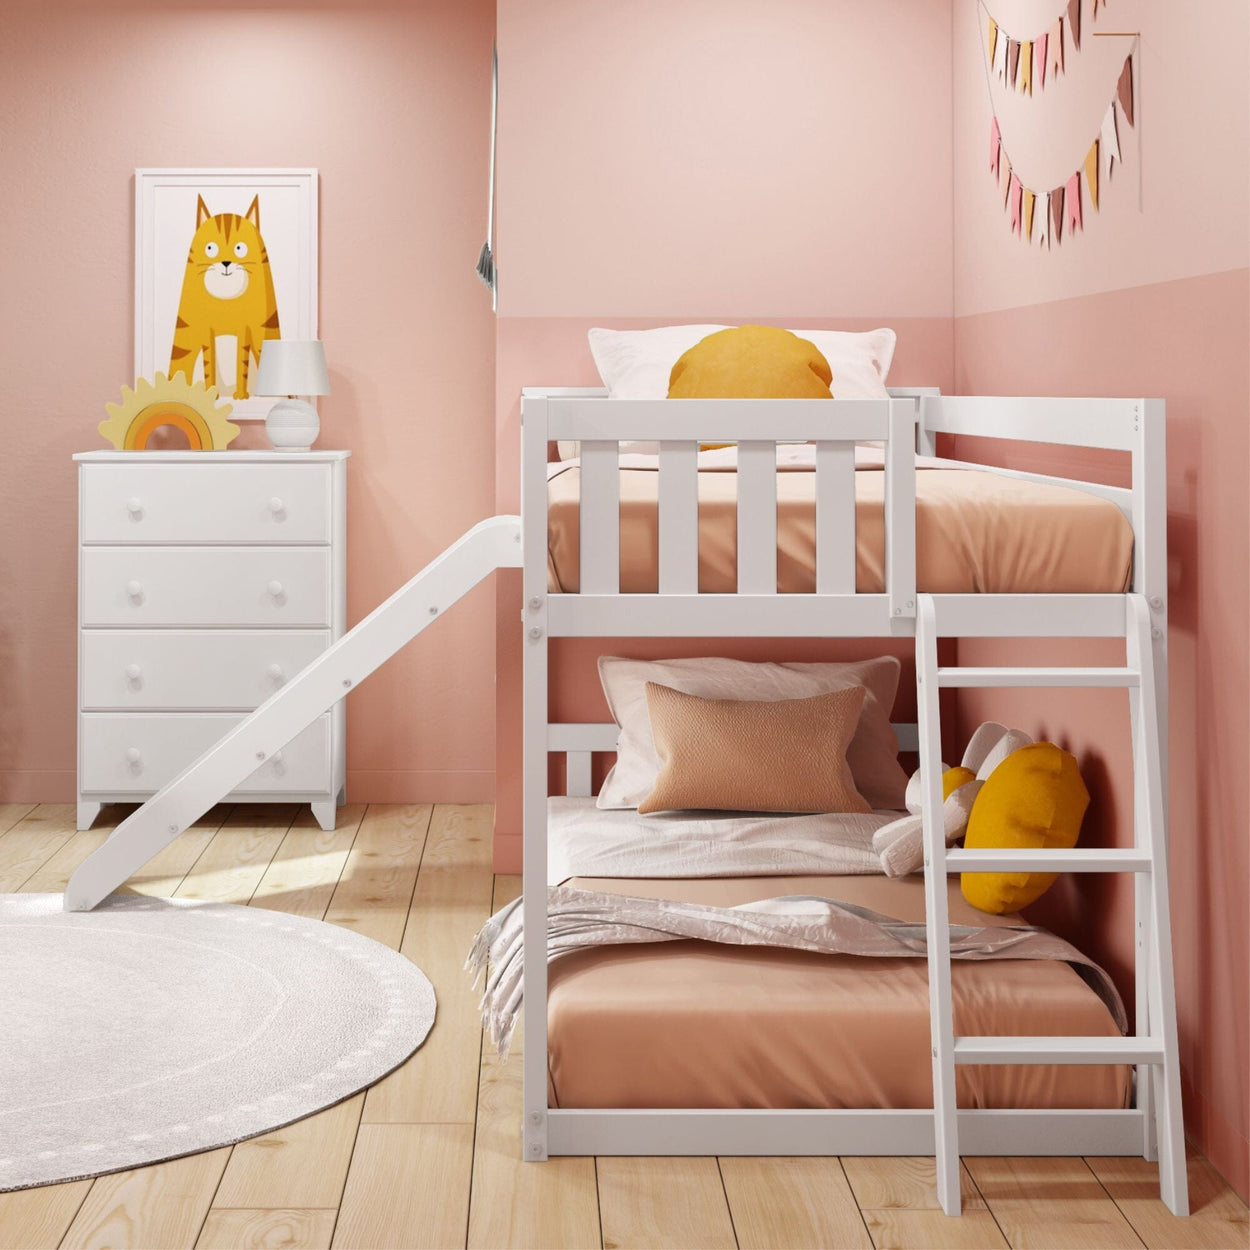 185321-002 : Bunk Beds Twin Over Twin Low Bunk Bed With Ladder on End & Slide, White